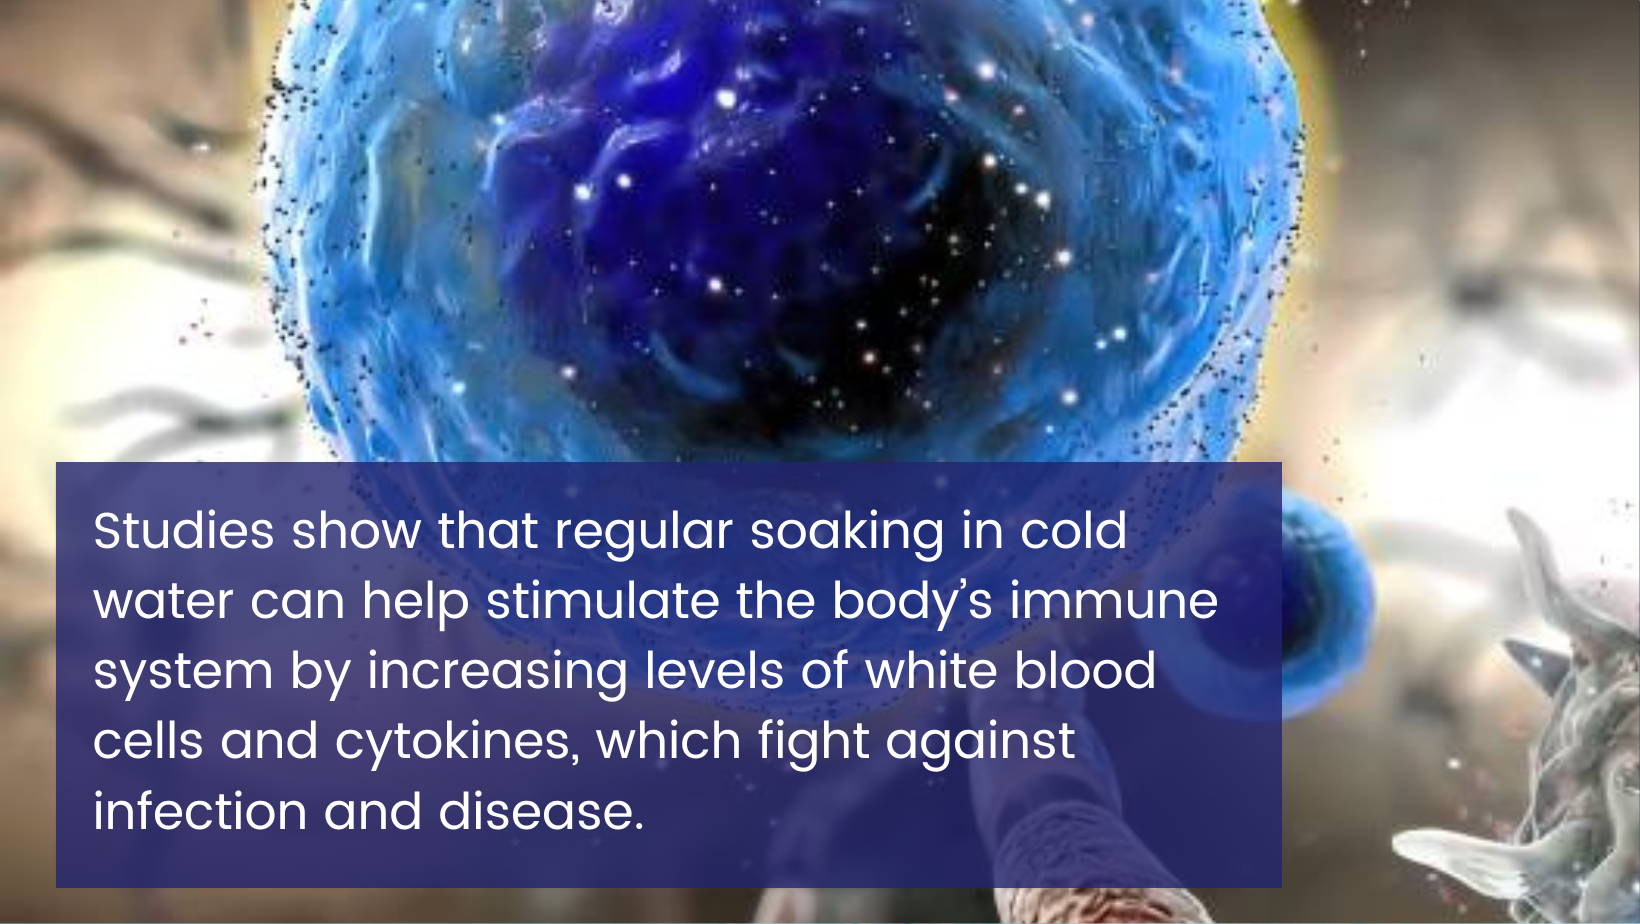 Studies show that regular soaking in cold water can help stimulate the body’s immune system by increasing levels of white blood cells and cytokines, which fight against infection and disease.